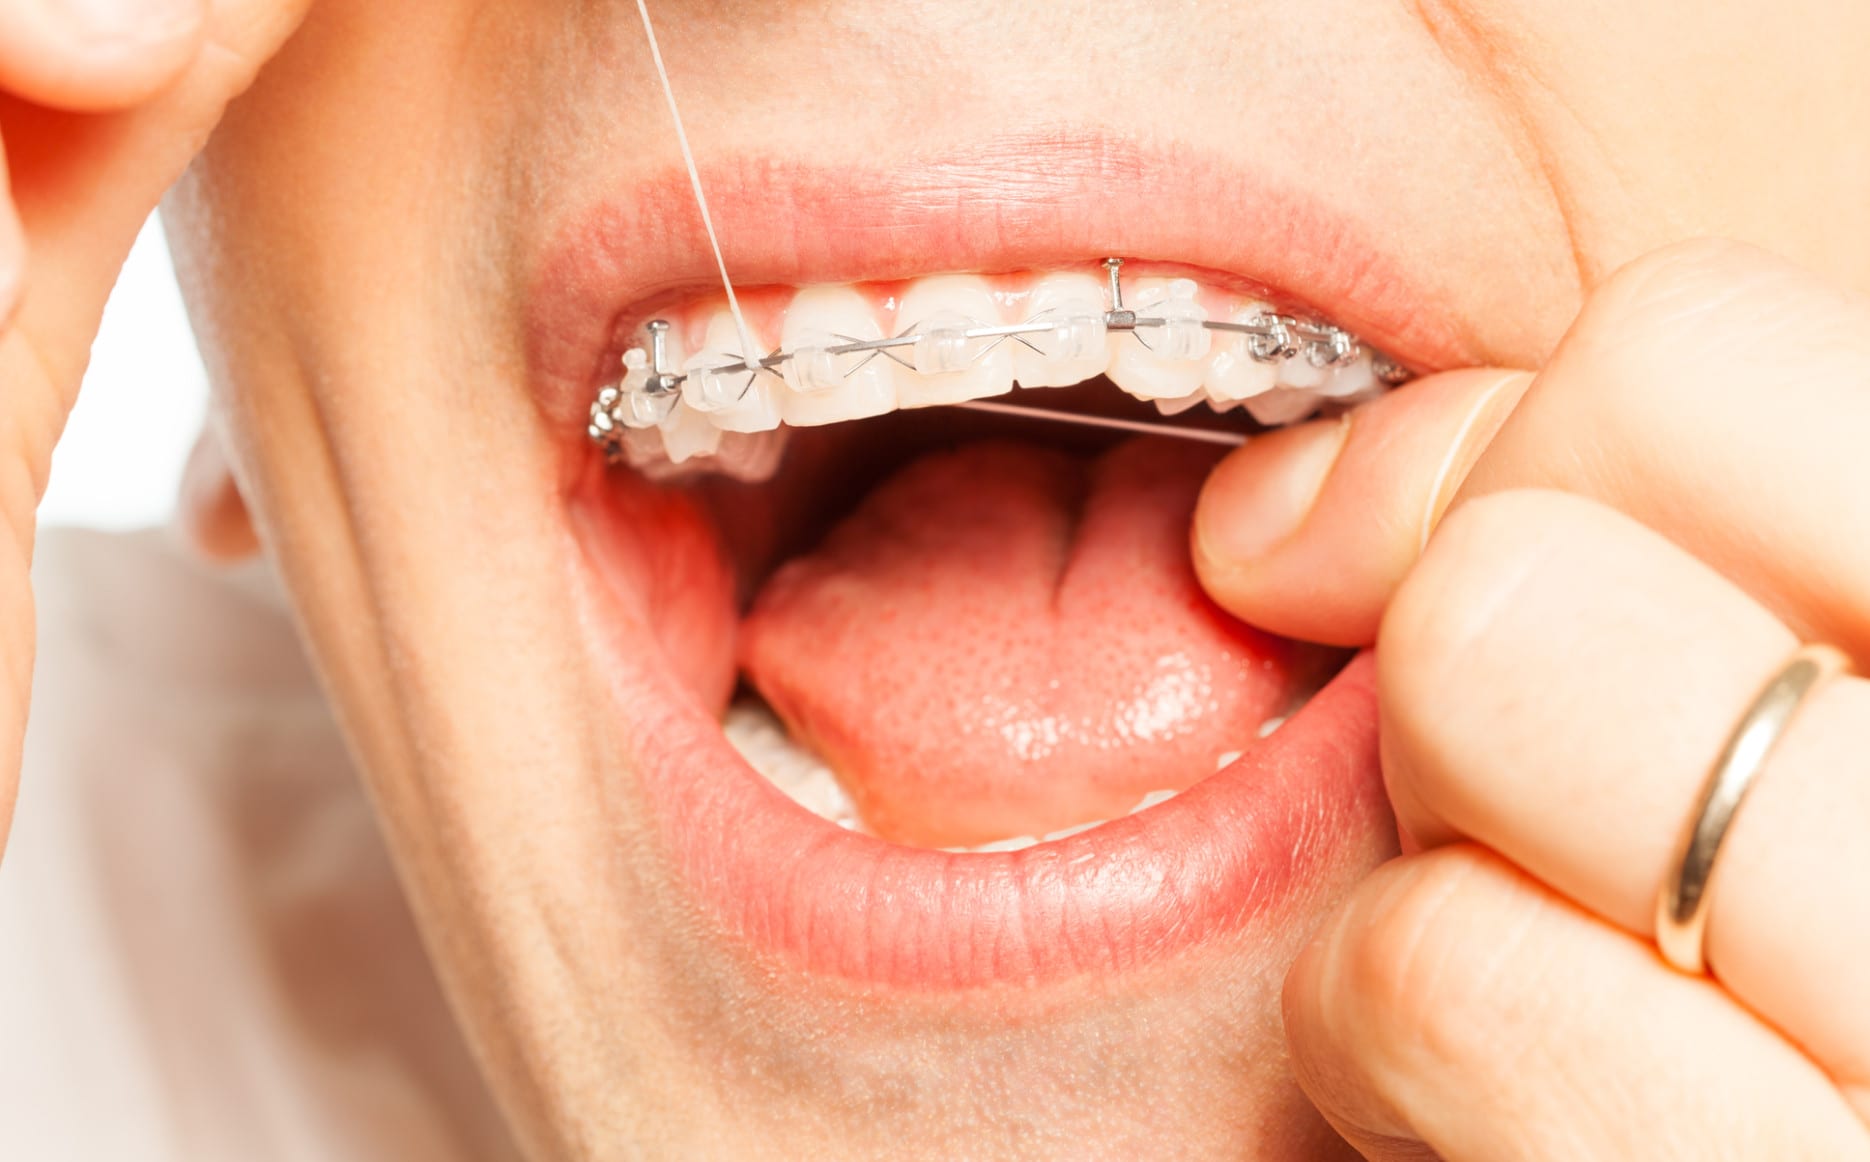 how to use dental floss with braces